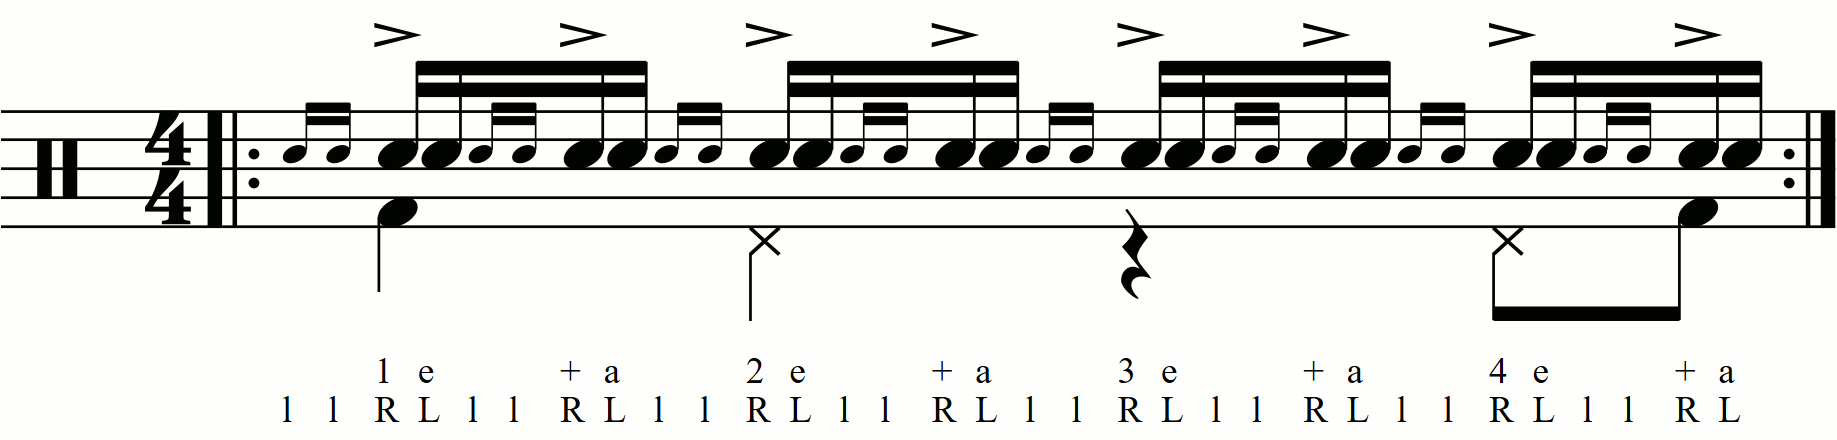 Applying level 0 groove movements on the feet under a Drag Tap